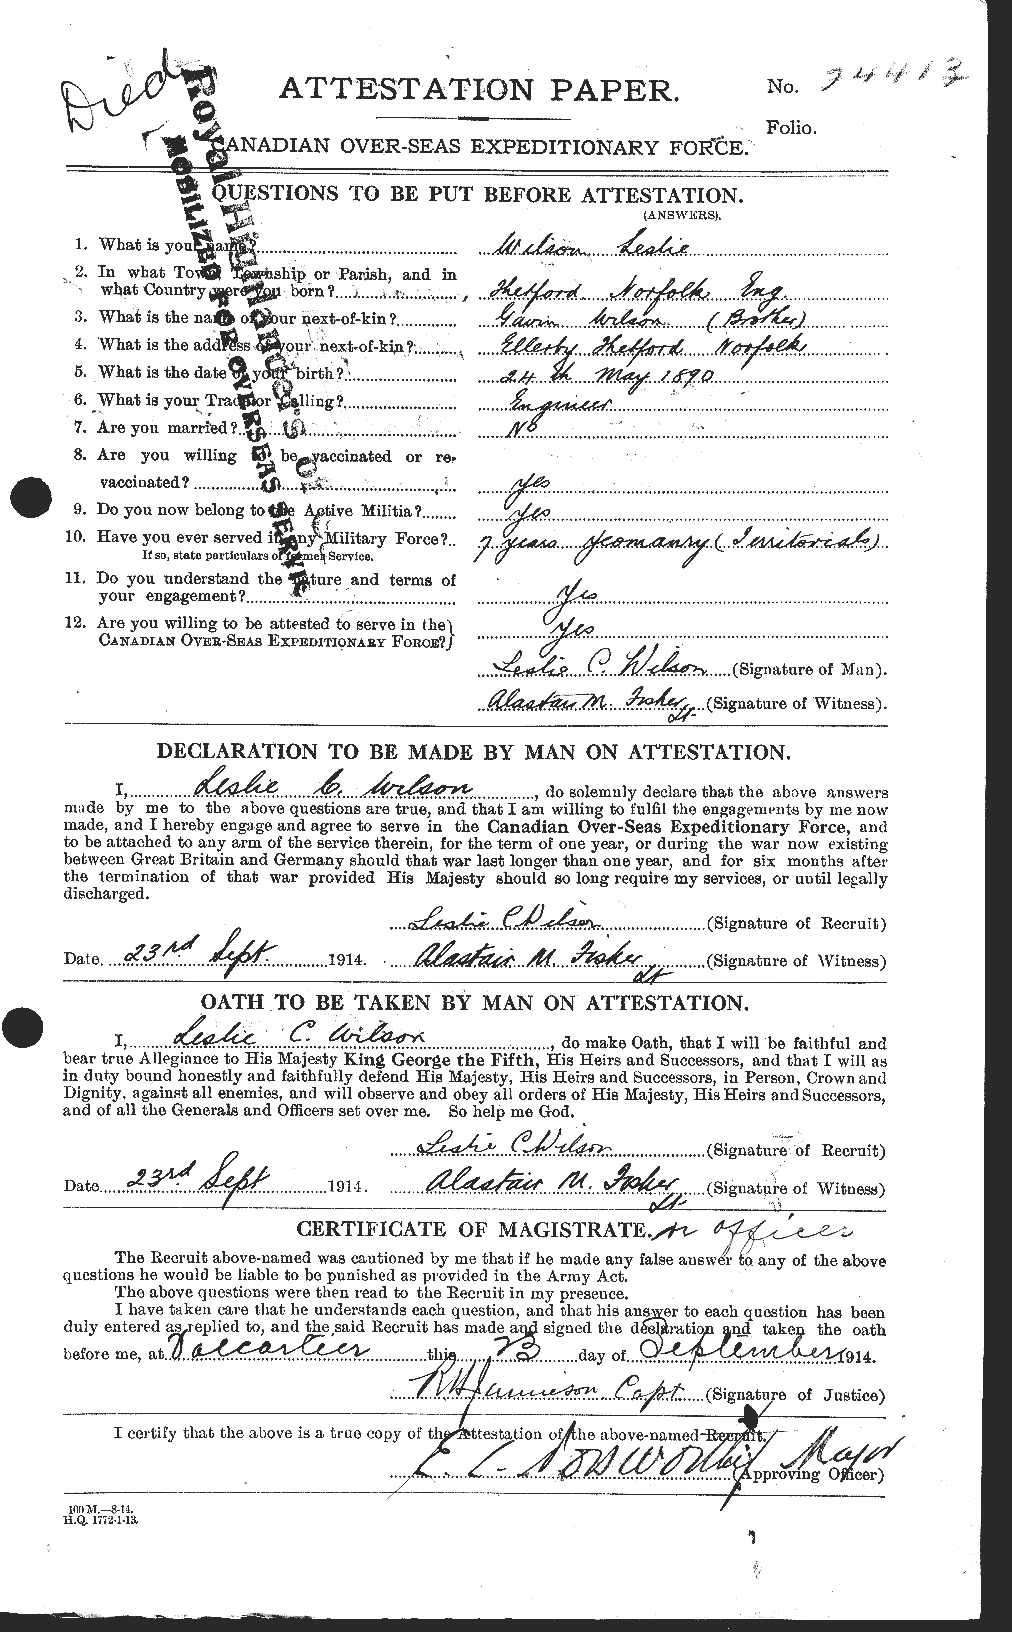 Personnel Records of the First World War - CEF 678645a